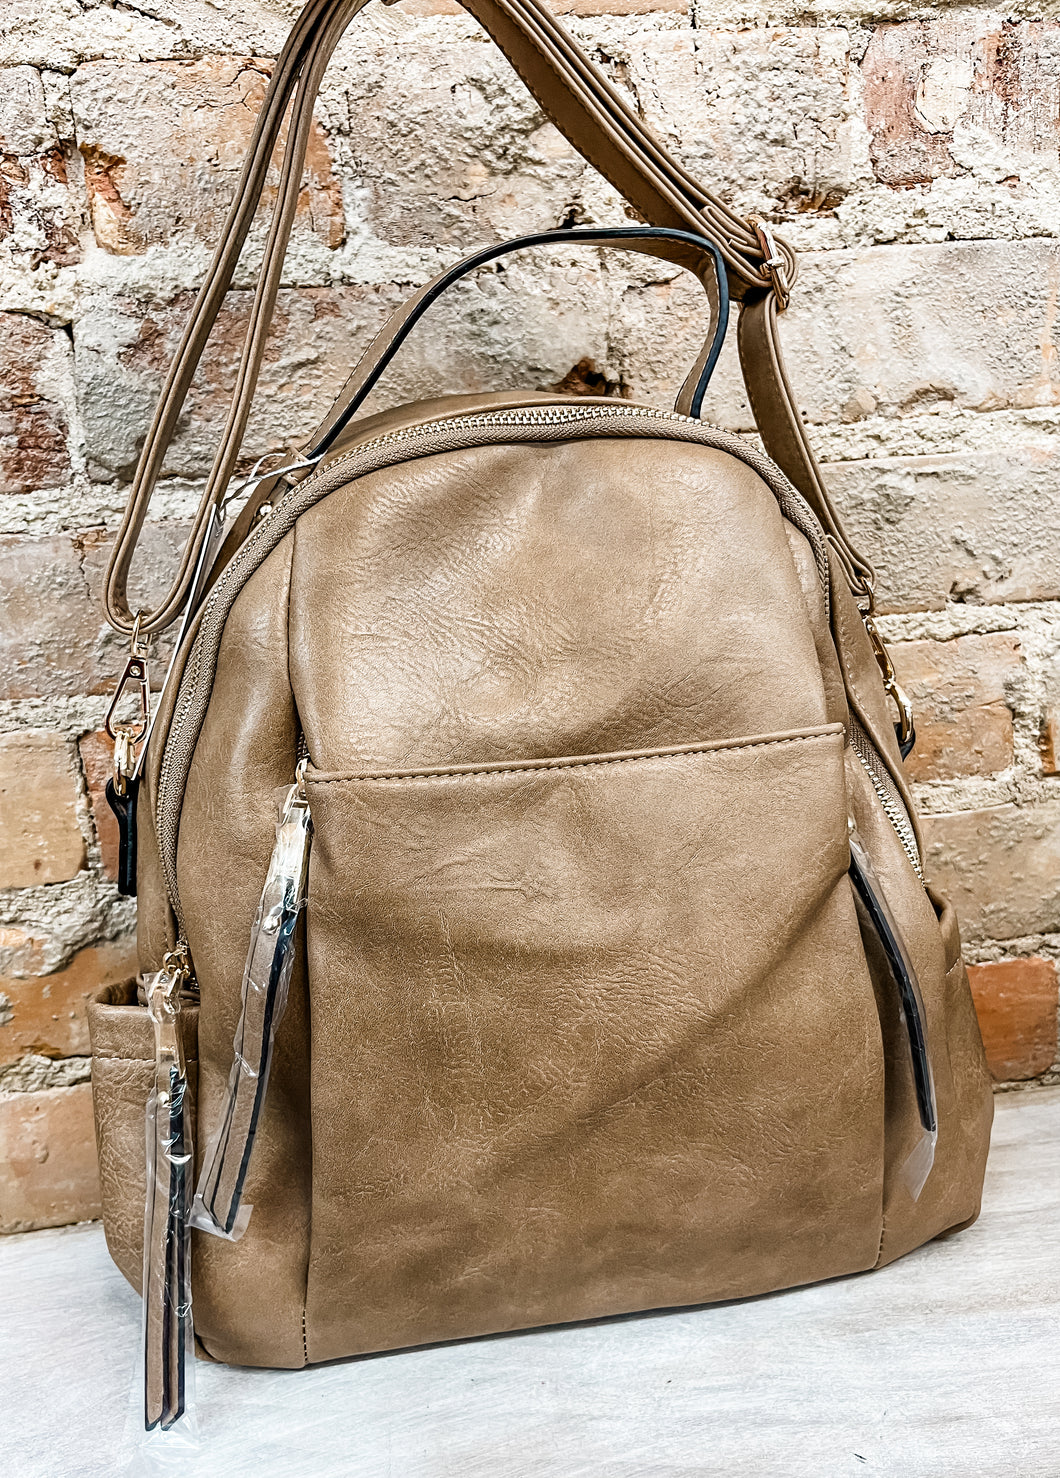 Brown leather book bag